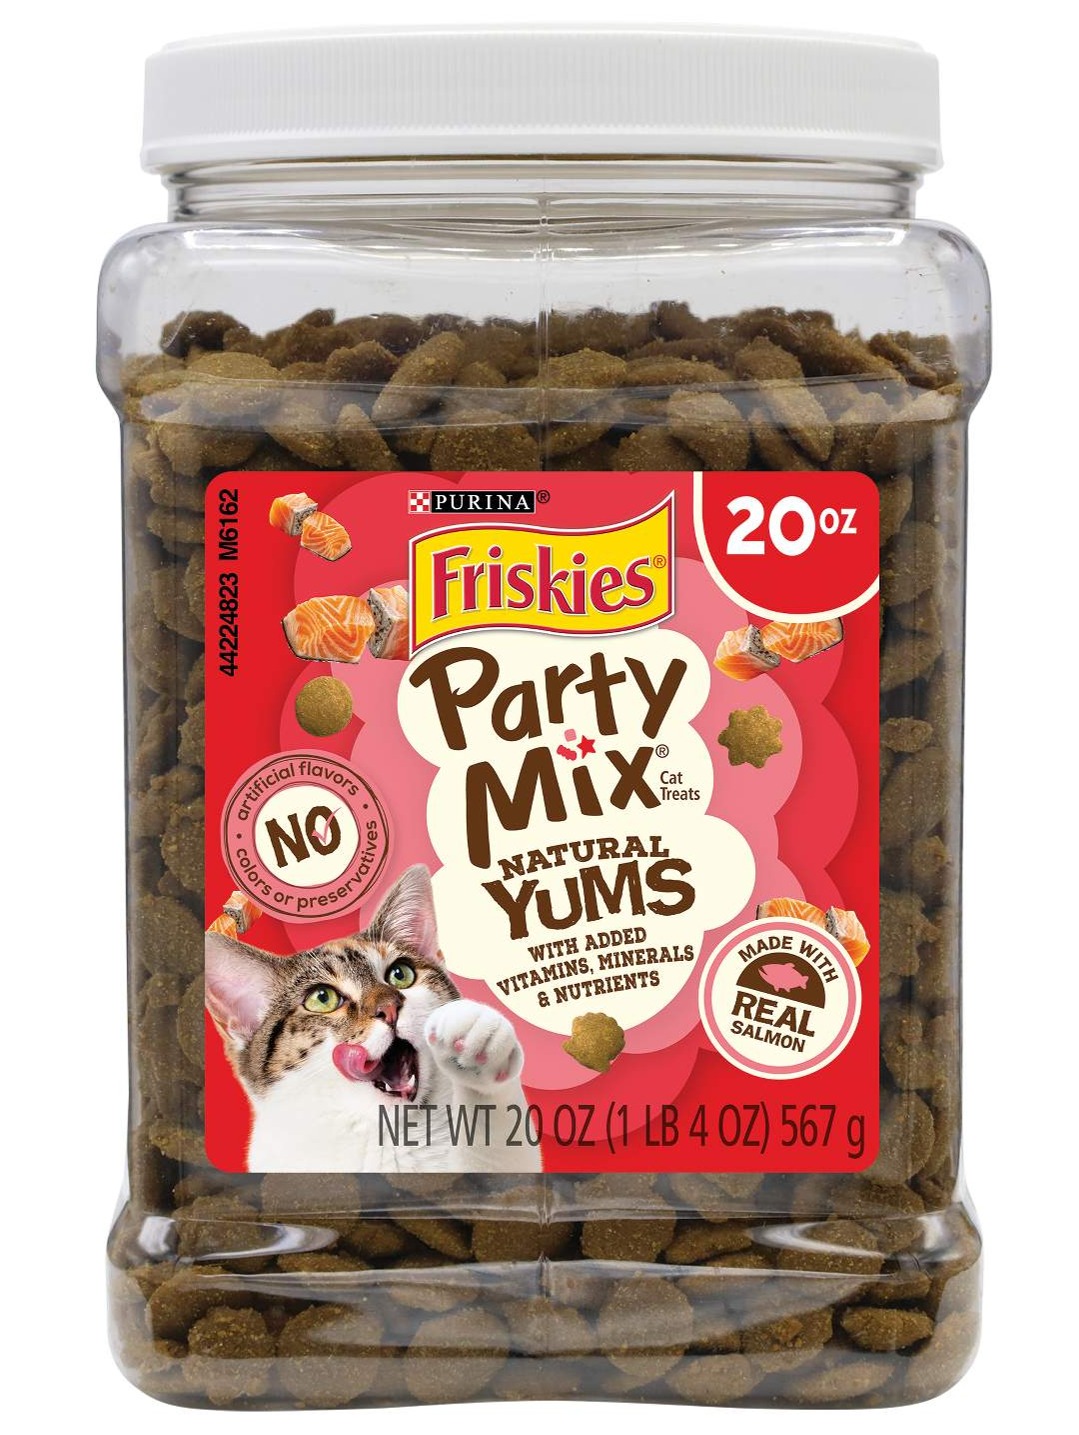 Purina Friskies Party Mix Salmon Natural Yums Seafood Flavor Crunchy Cat Treat - 20oz.  Qty 6 for $22.92 @ Target